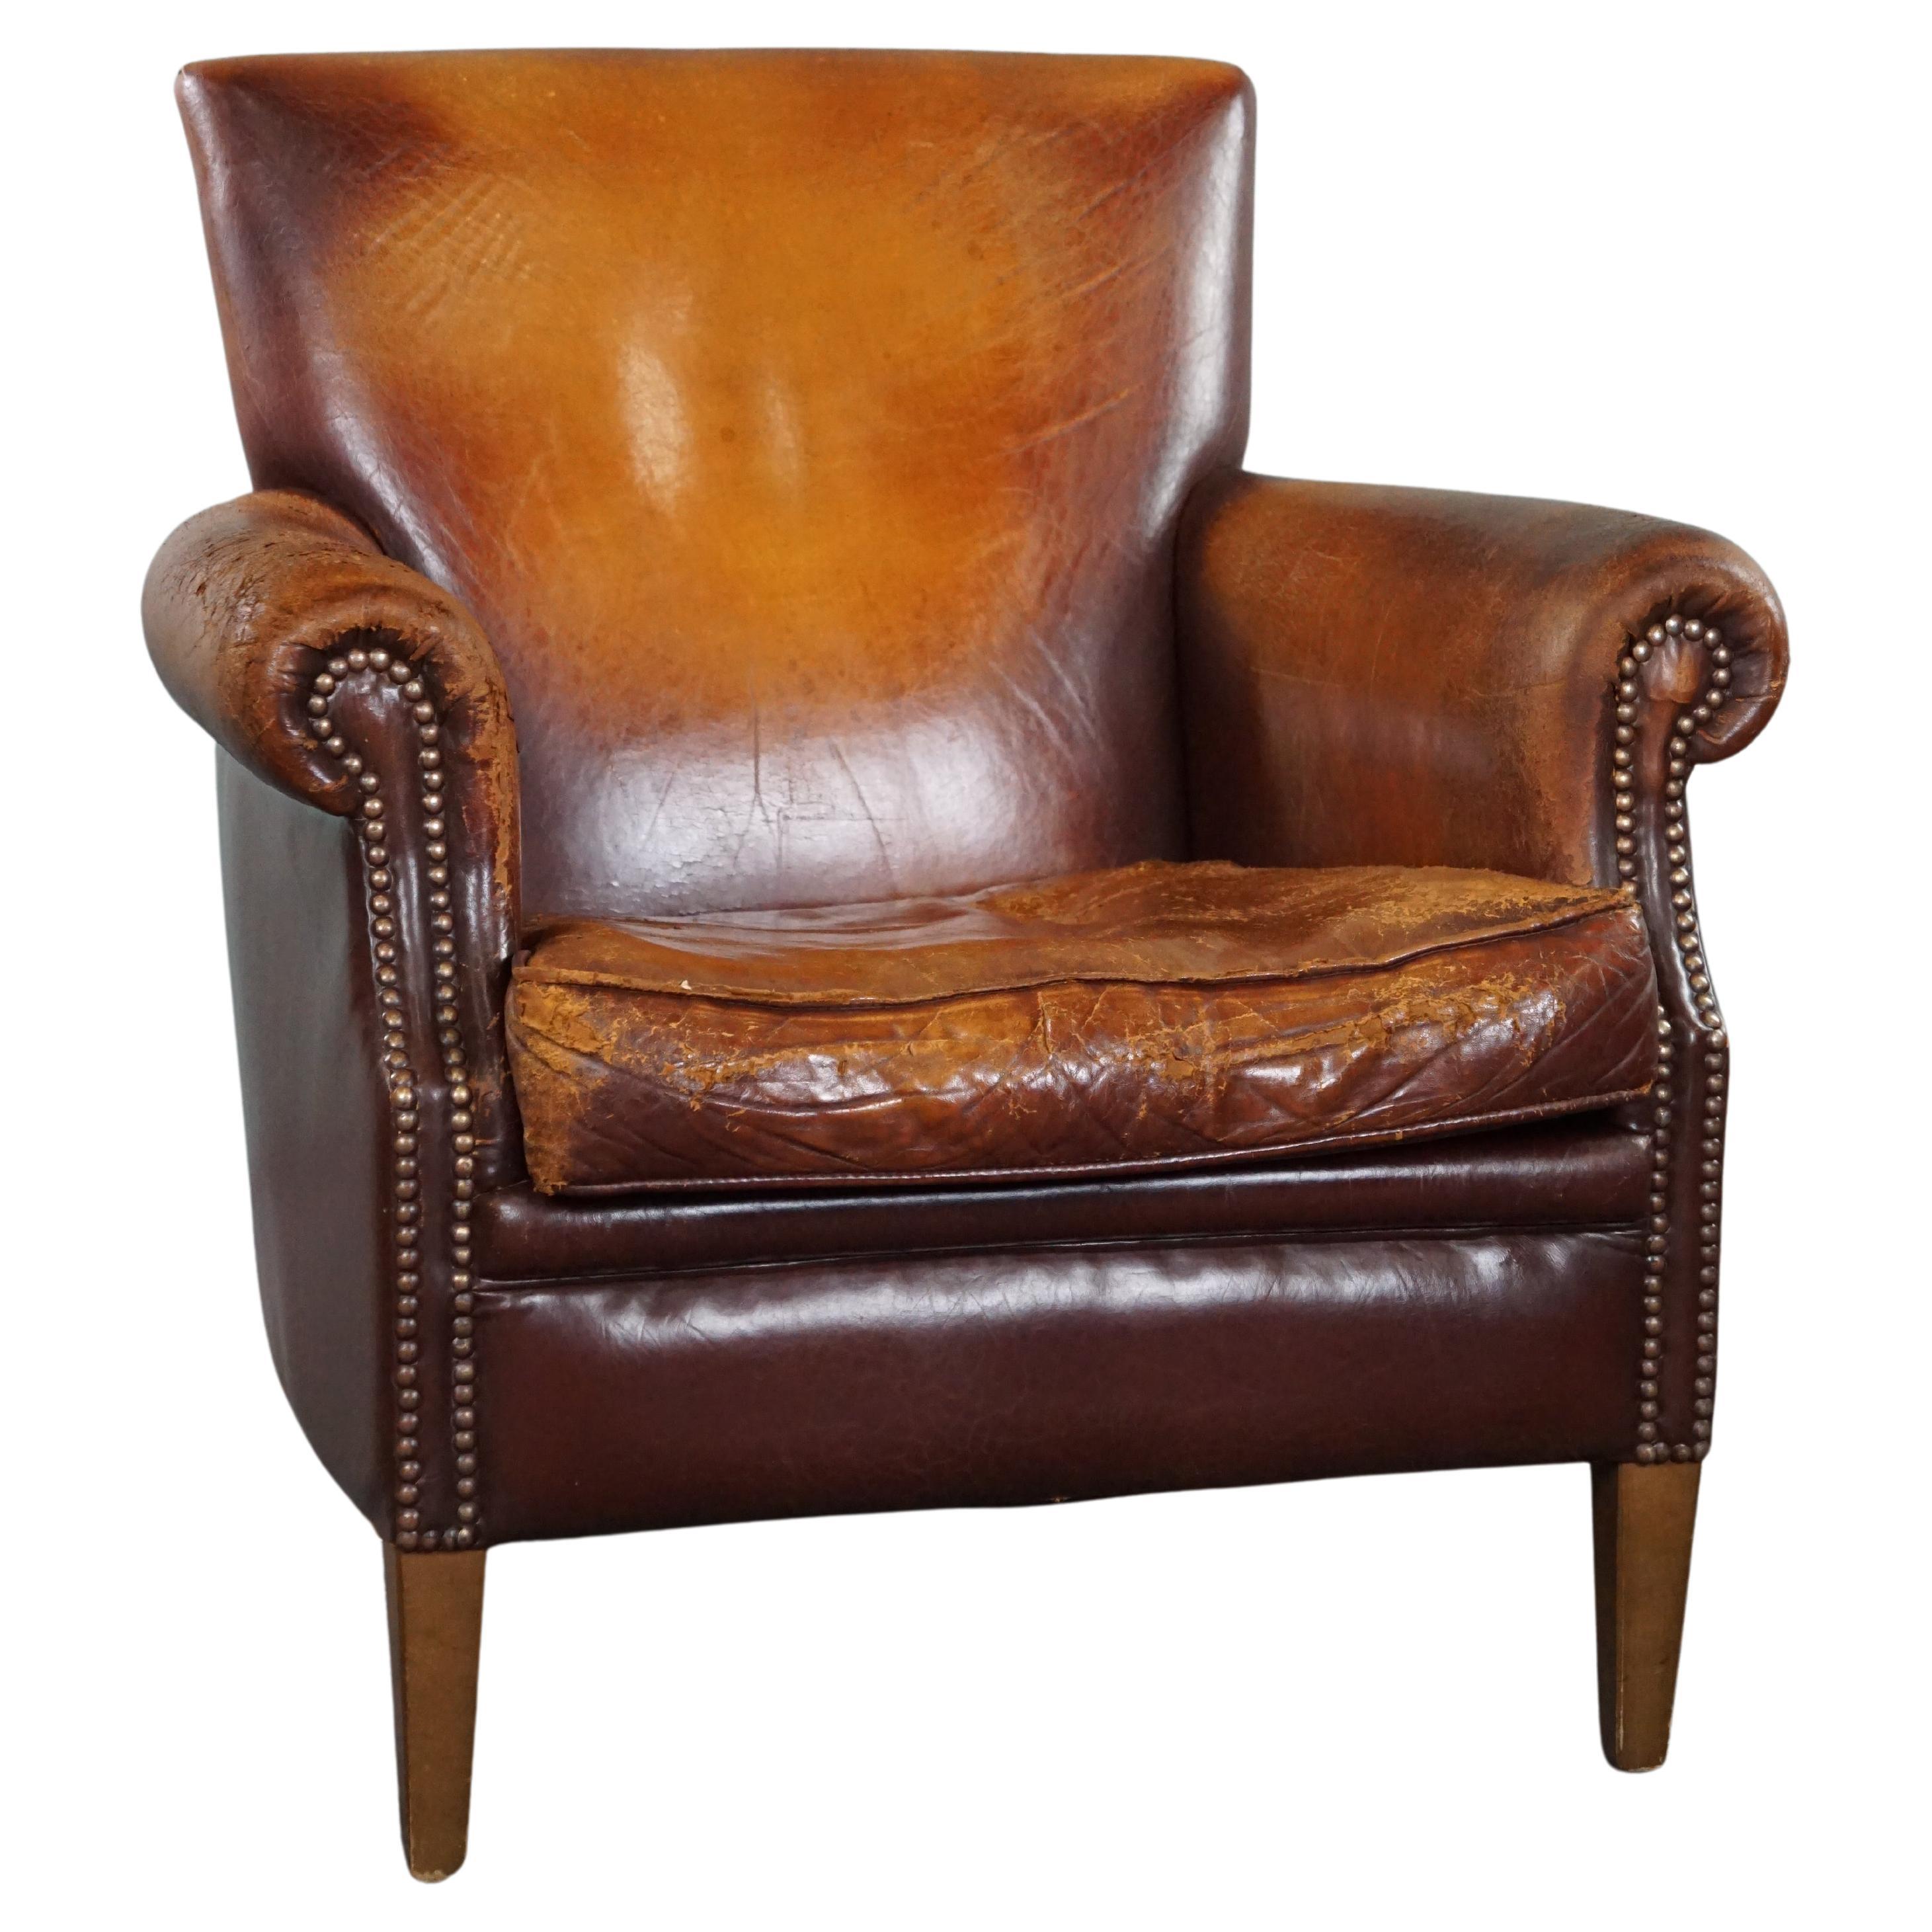 Sturdy sheep leather armchair with a distressed look For Sale